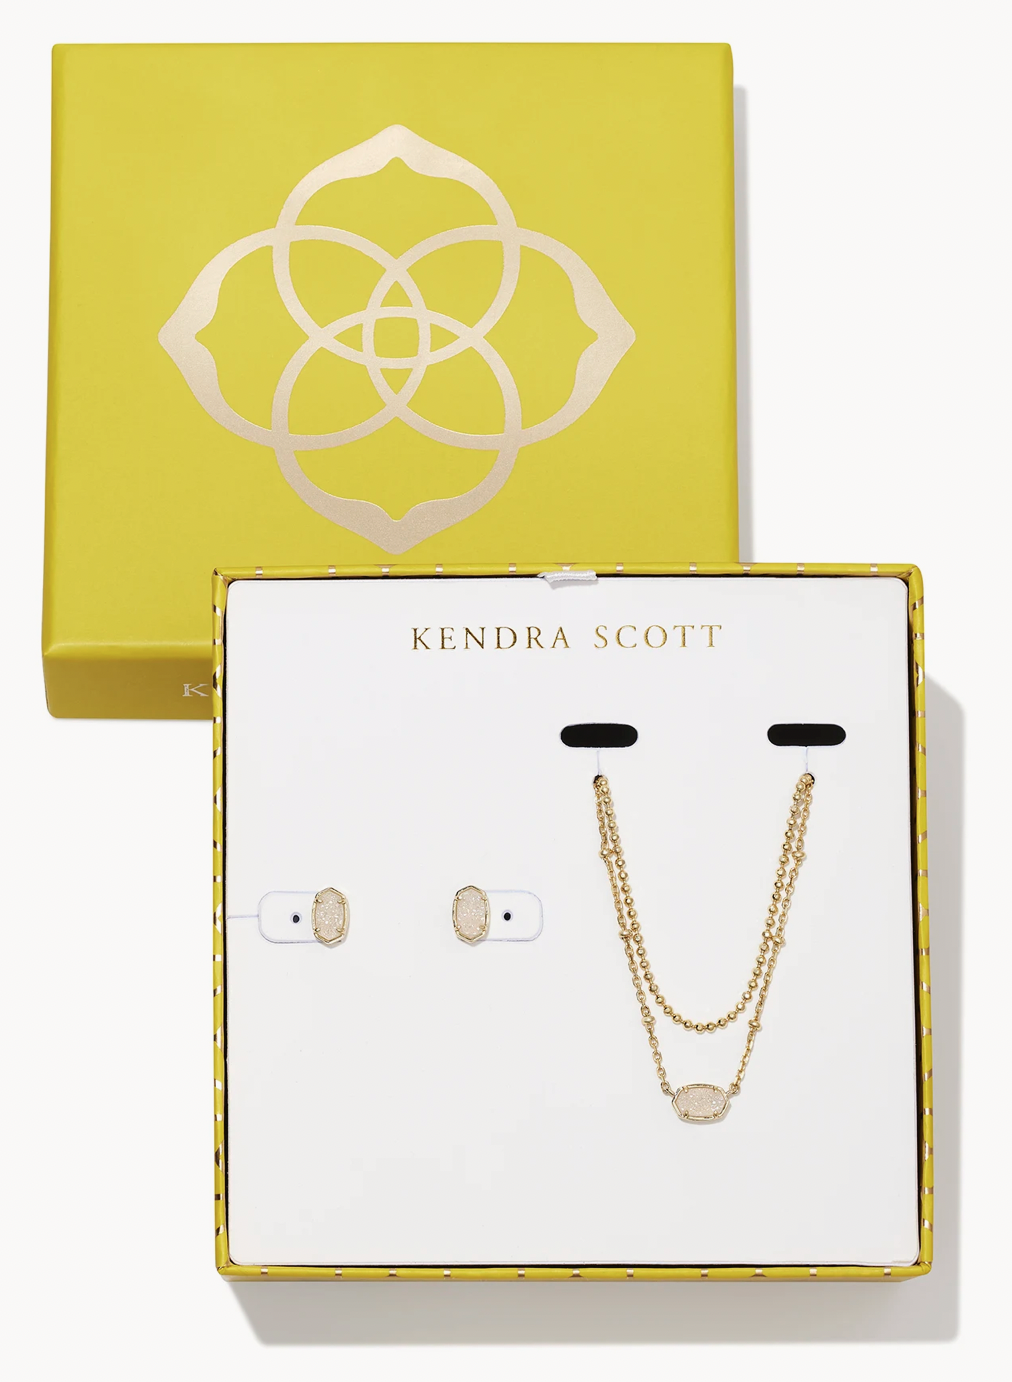 Kendra Scott earrings and necklace set